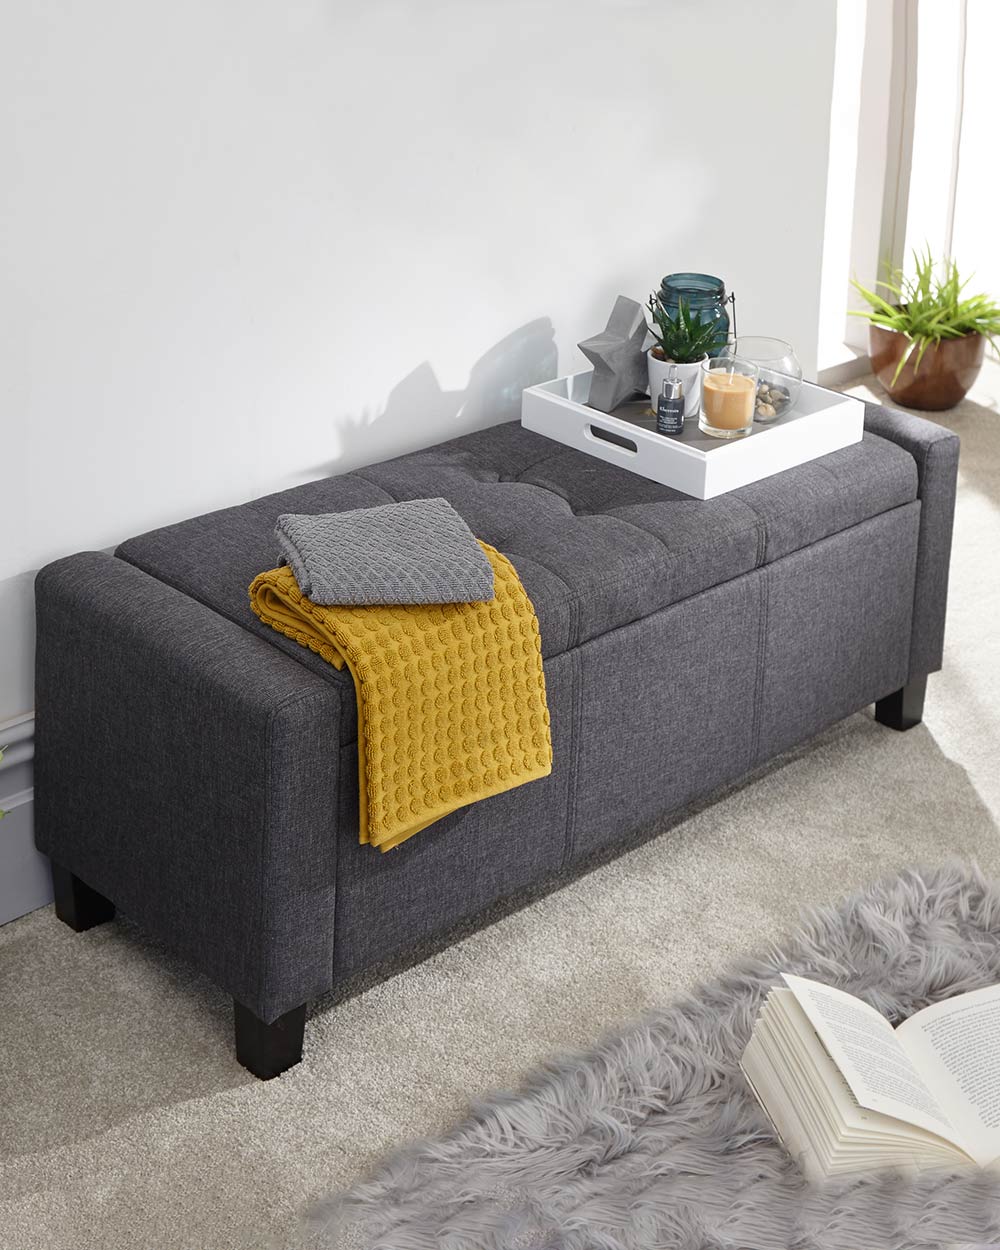 storage bench ottoman blanket box seat in grey upholstered fabric lifestyle images